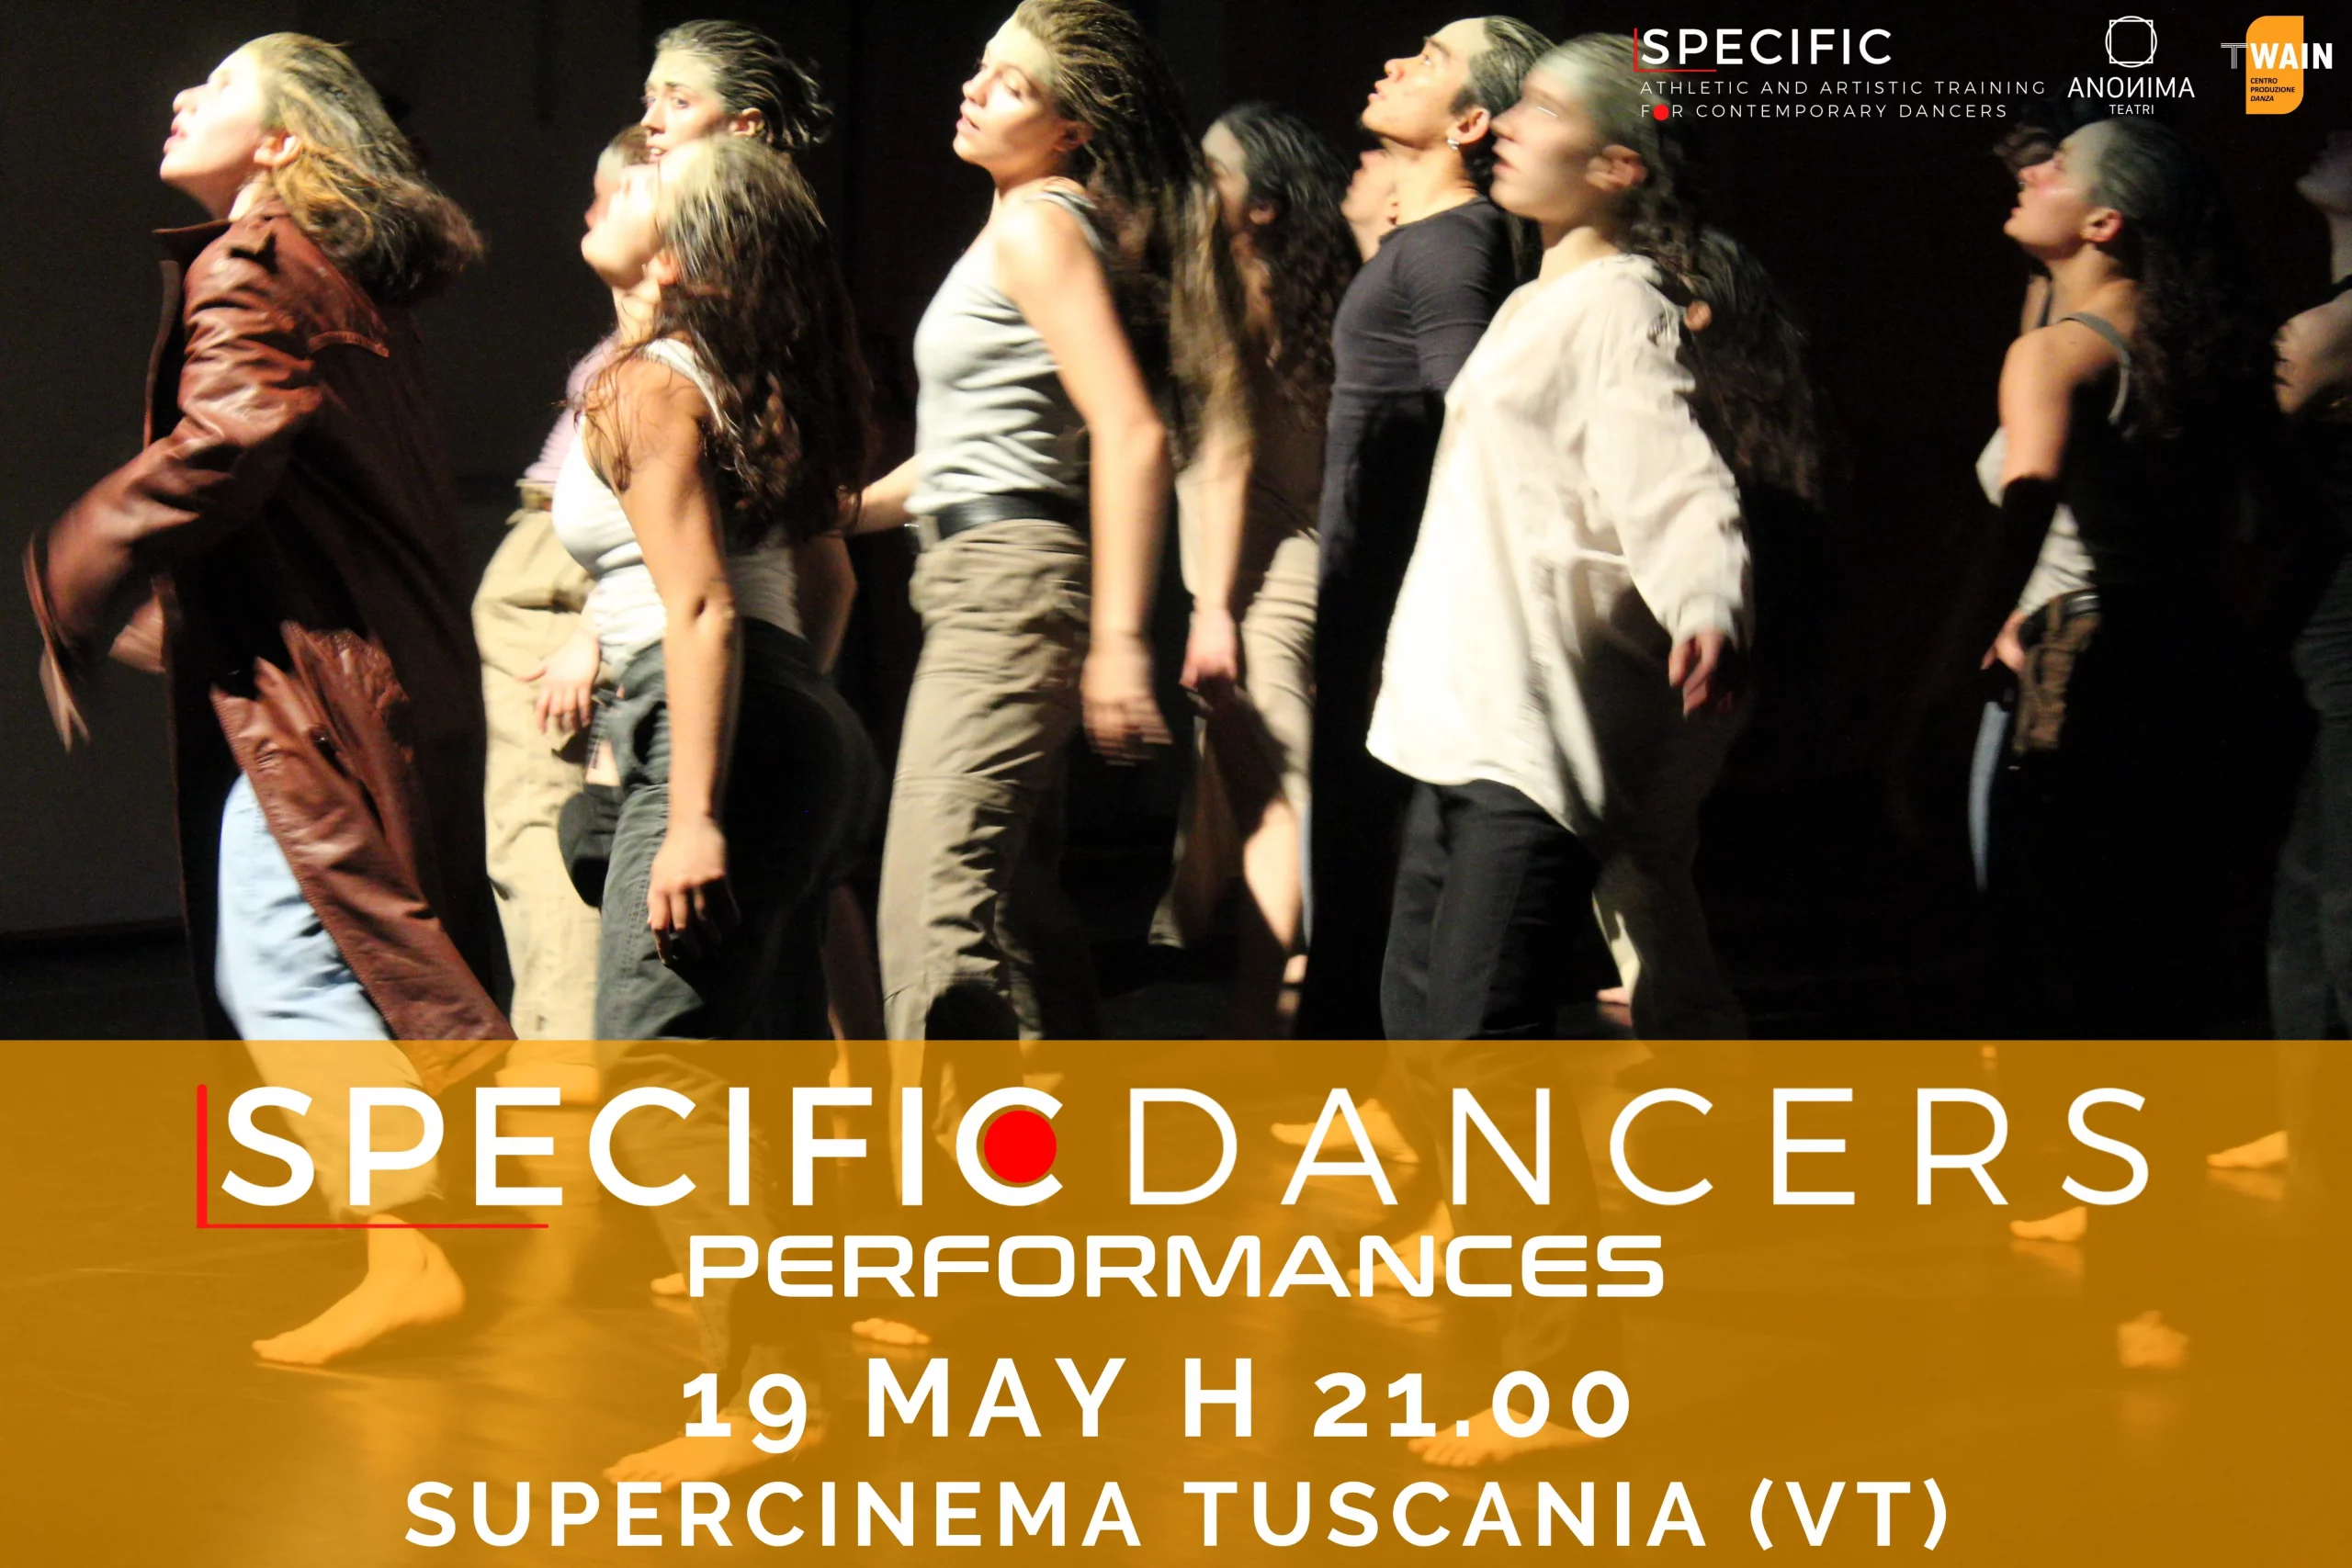 SPECIFIC dancers - performances 19 may 2024 - 19 maggio a Tuscania